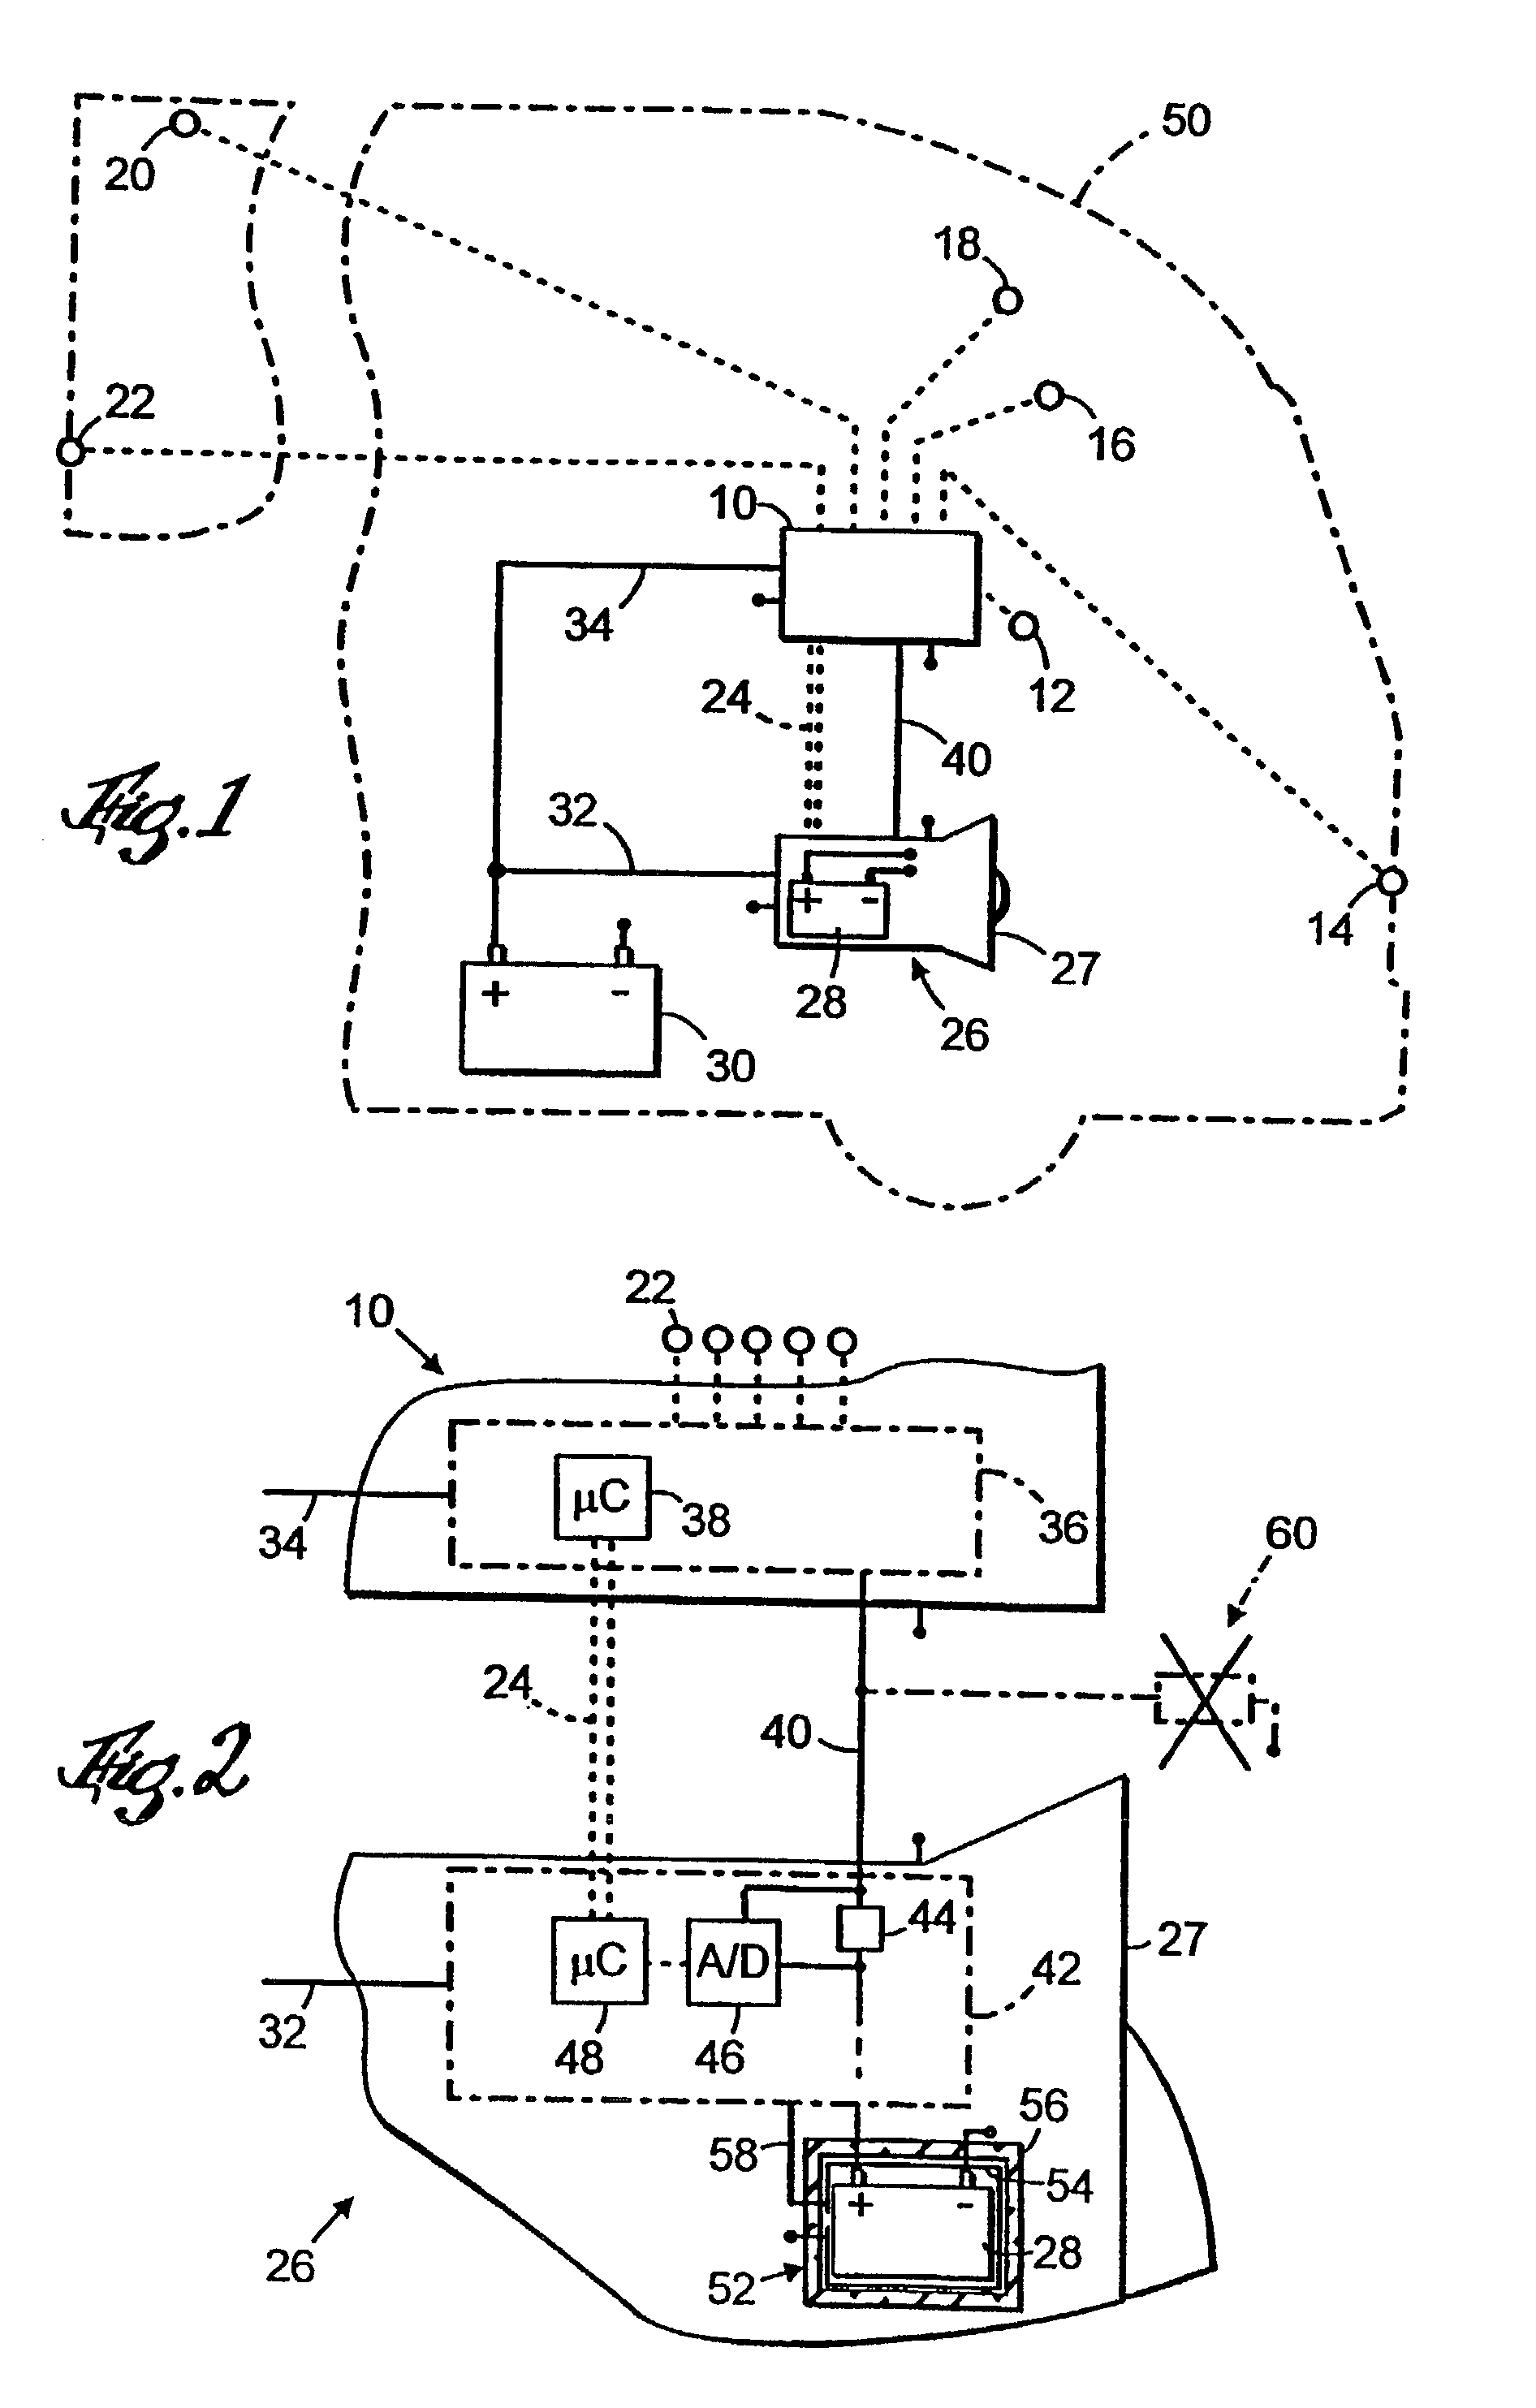 Alarm system for a motor vehicle